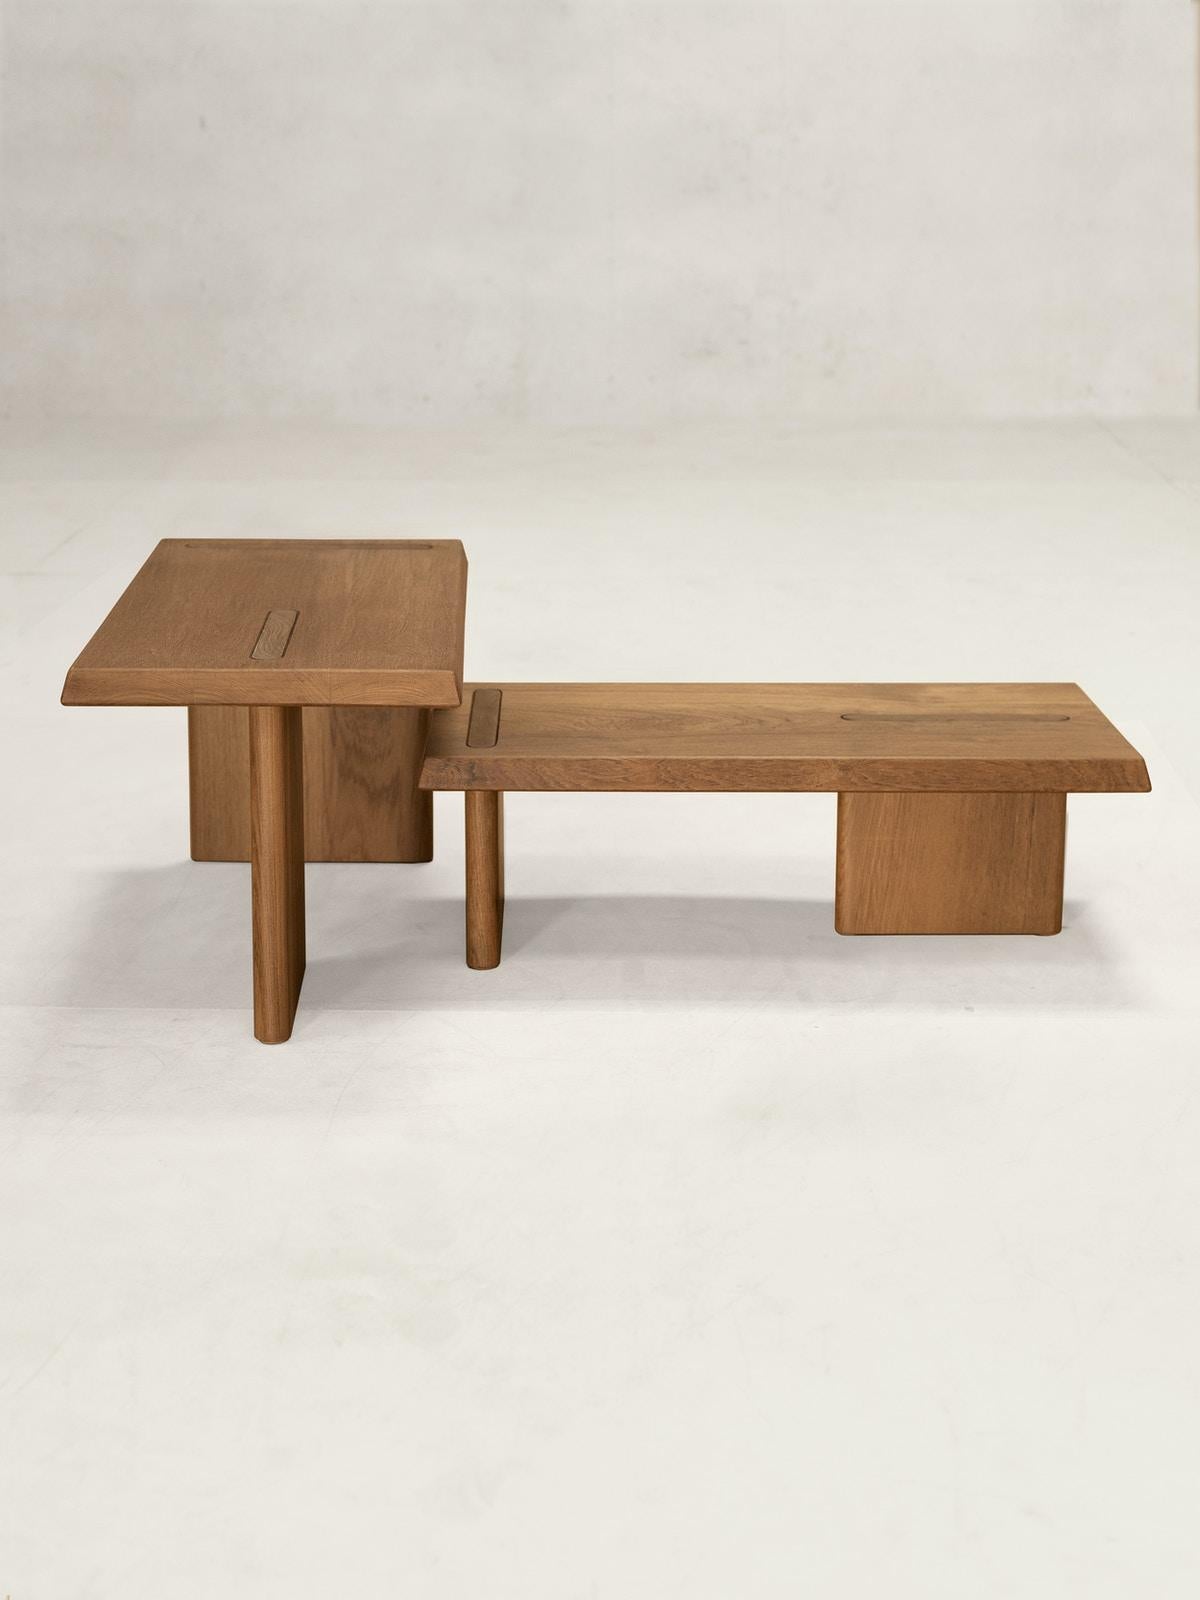 21st Century Designed x+l 08 Side Tables Teak Wood Brown

The x+l Side Tables are made entirely from solid teakwood and designed to compliment the x+l Modular Sofa Set. However, they can also be used independently as side tables or small coffee